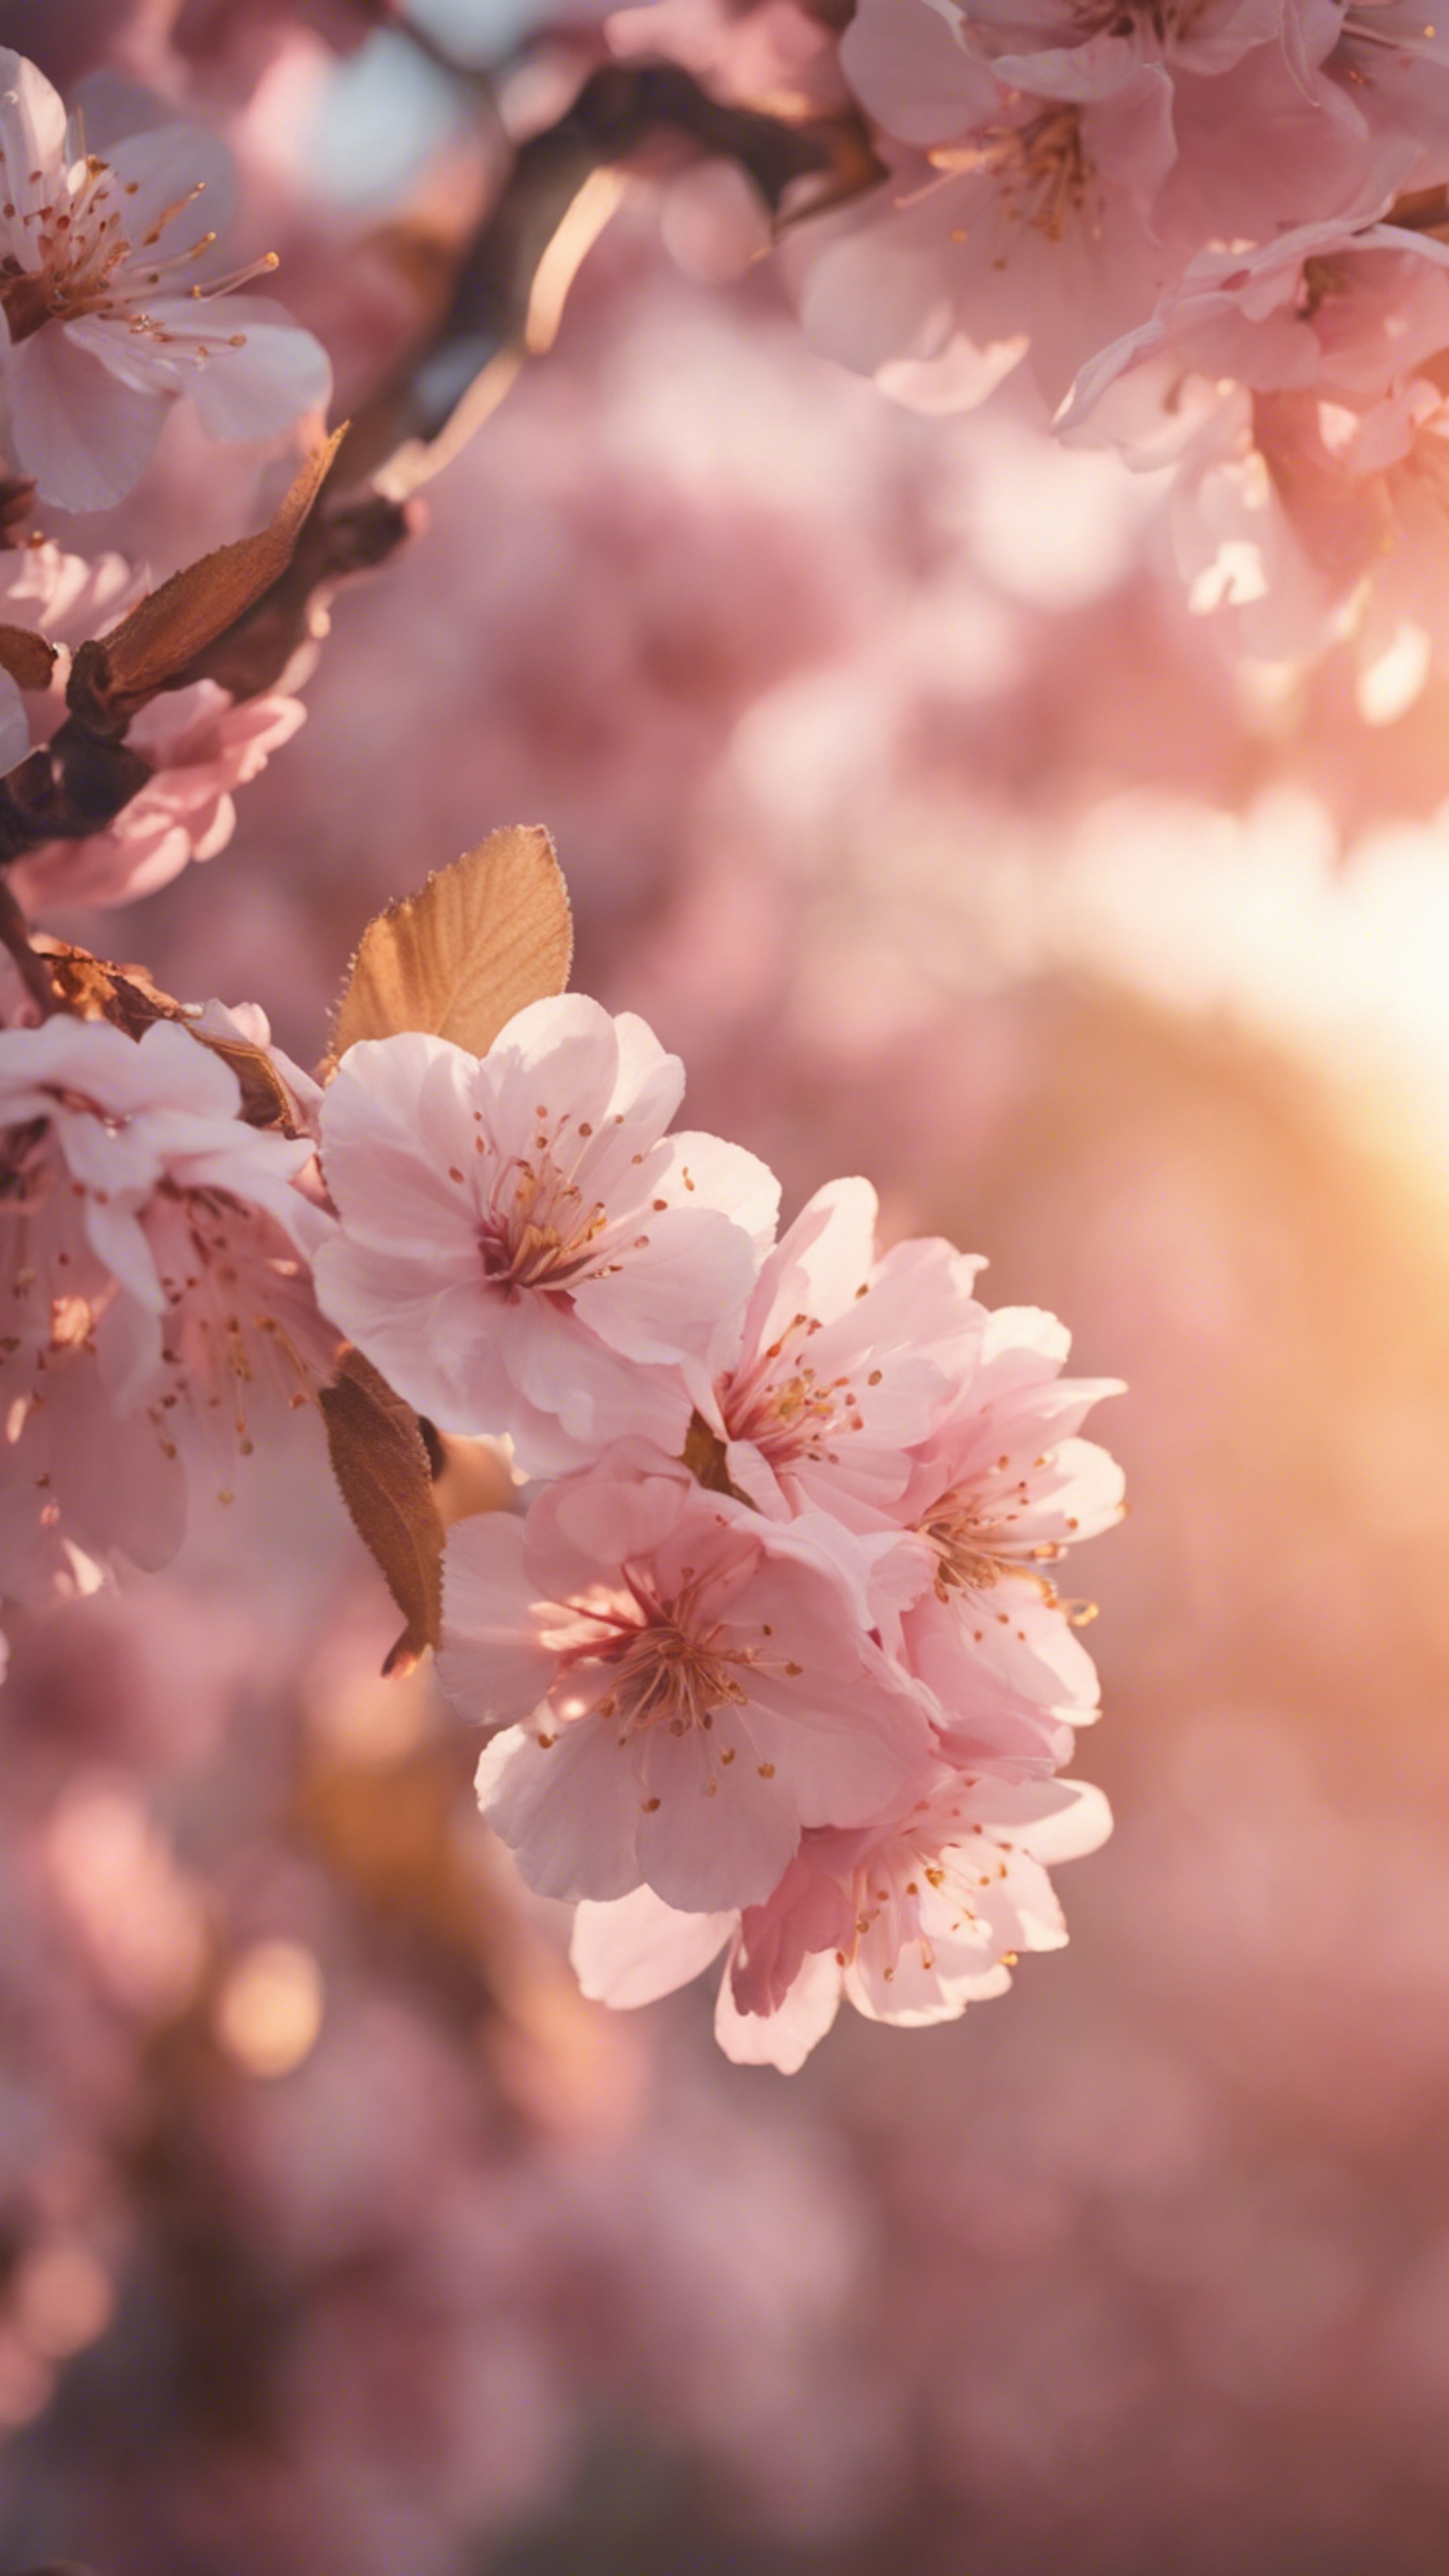 A delicate pink cherry blossom tree with gold leaves against a soft sunset. Tapet[63878b5c392143fbba4e]